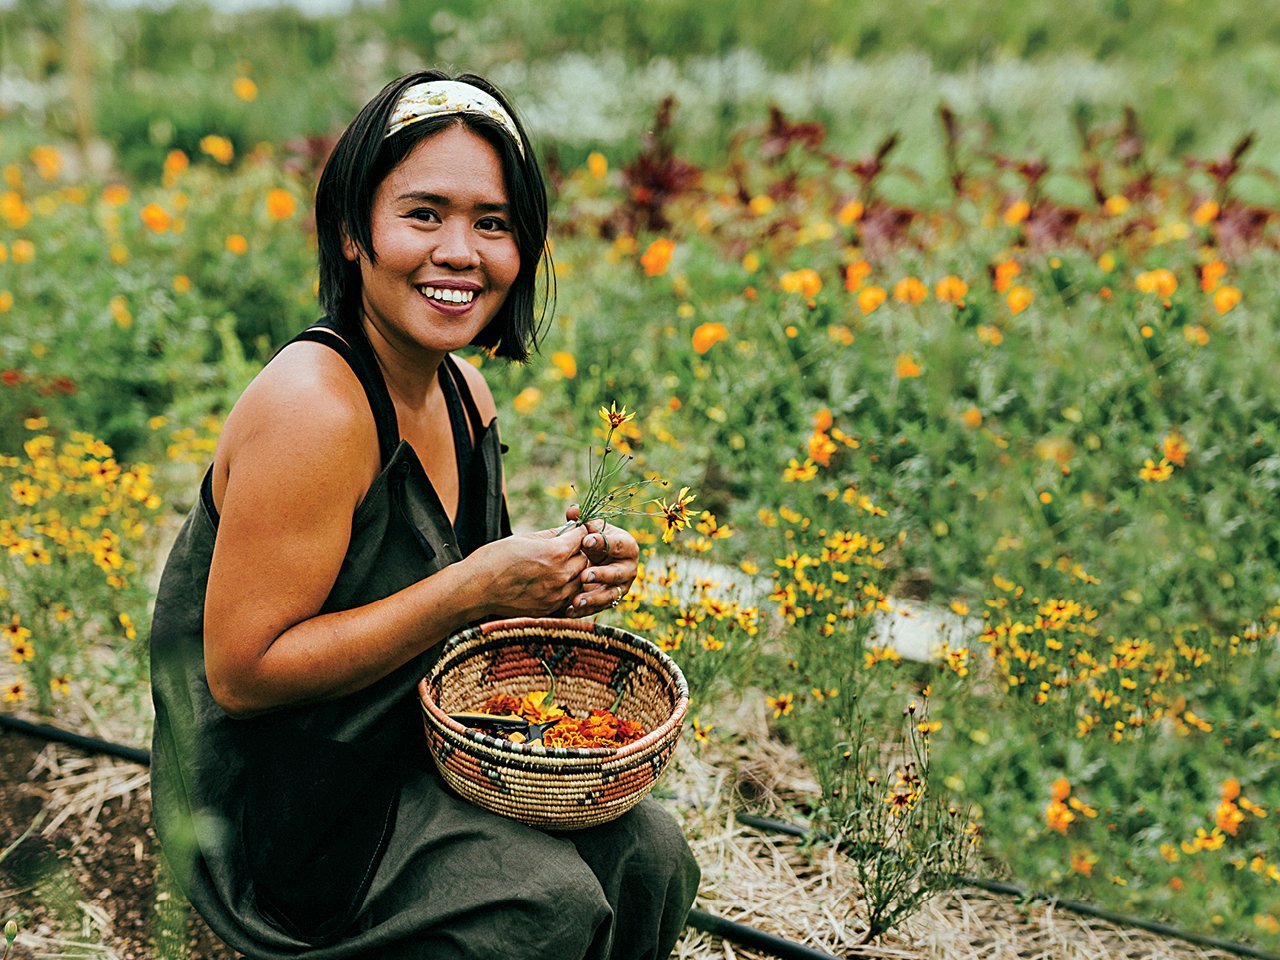 A photo of a woman, crouched down in a flower garden full of orange blooms, picking flowers and putting them in a basket fl